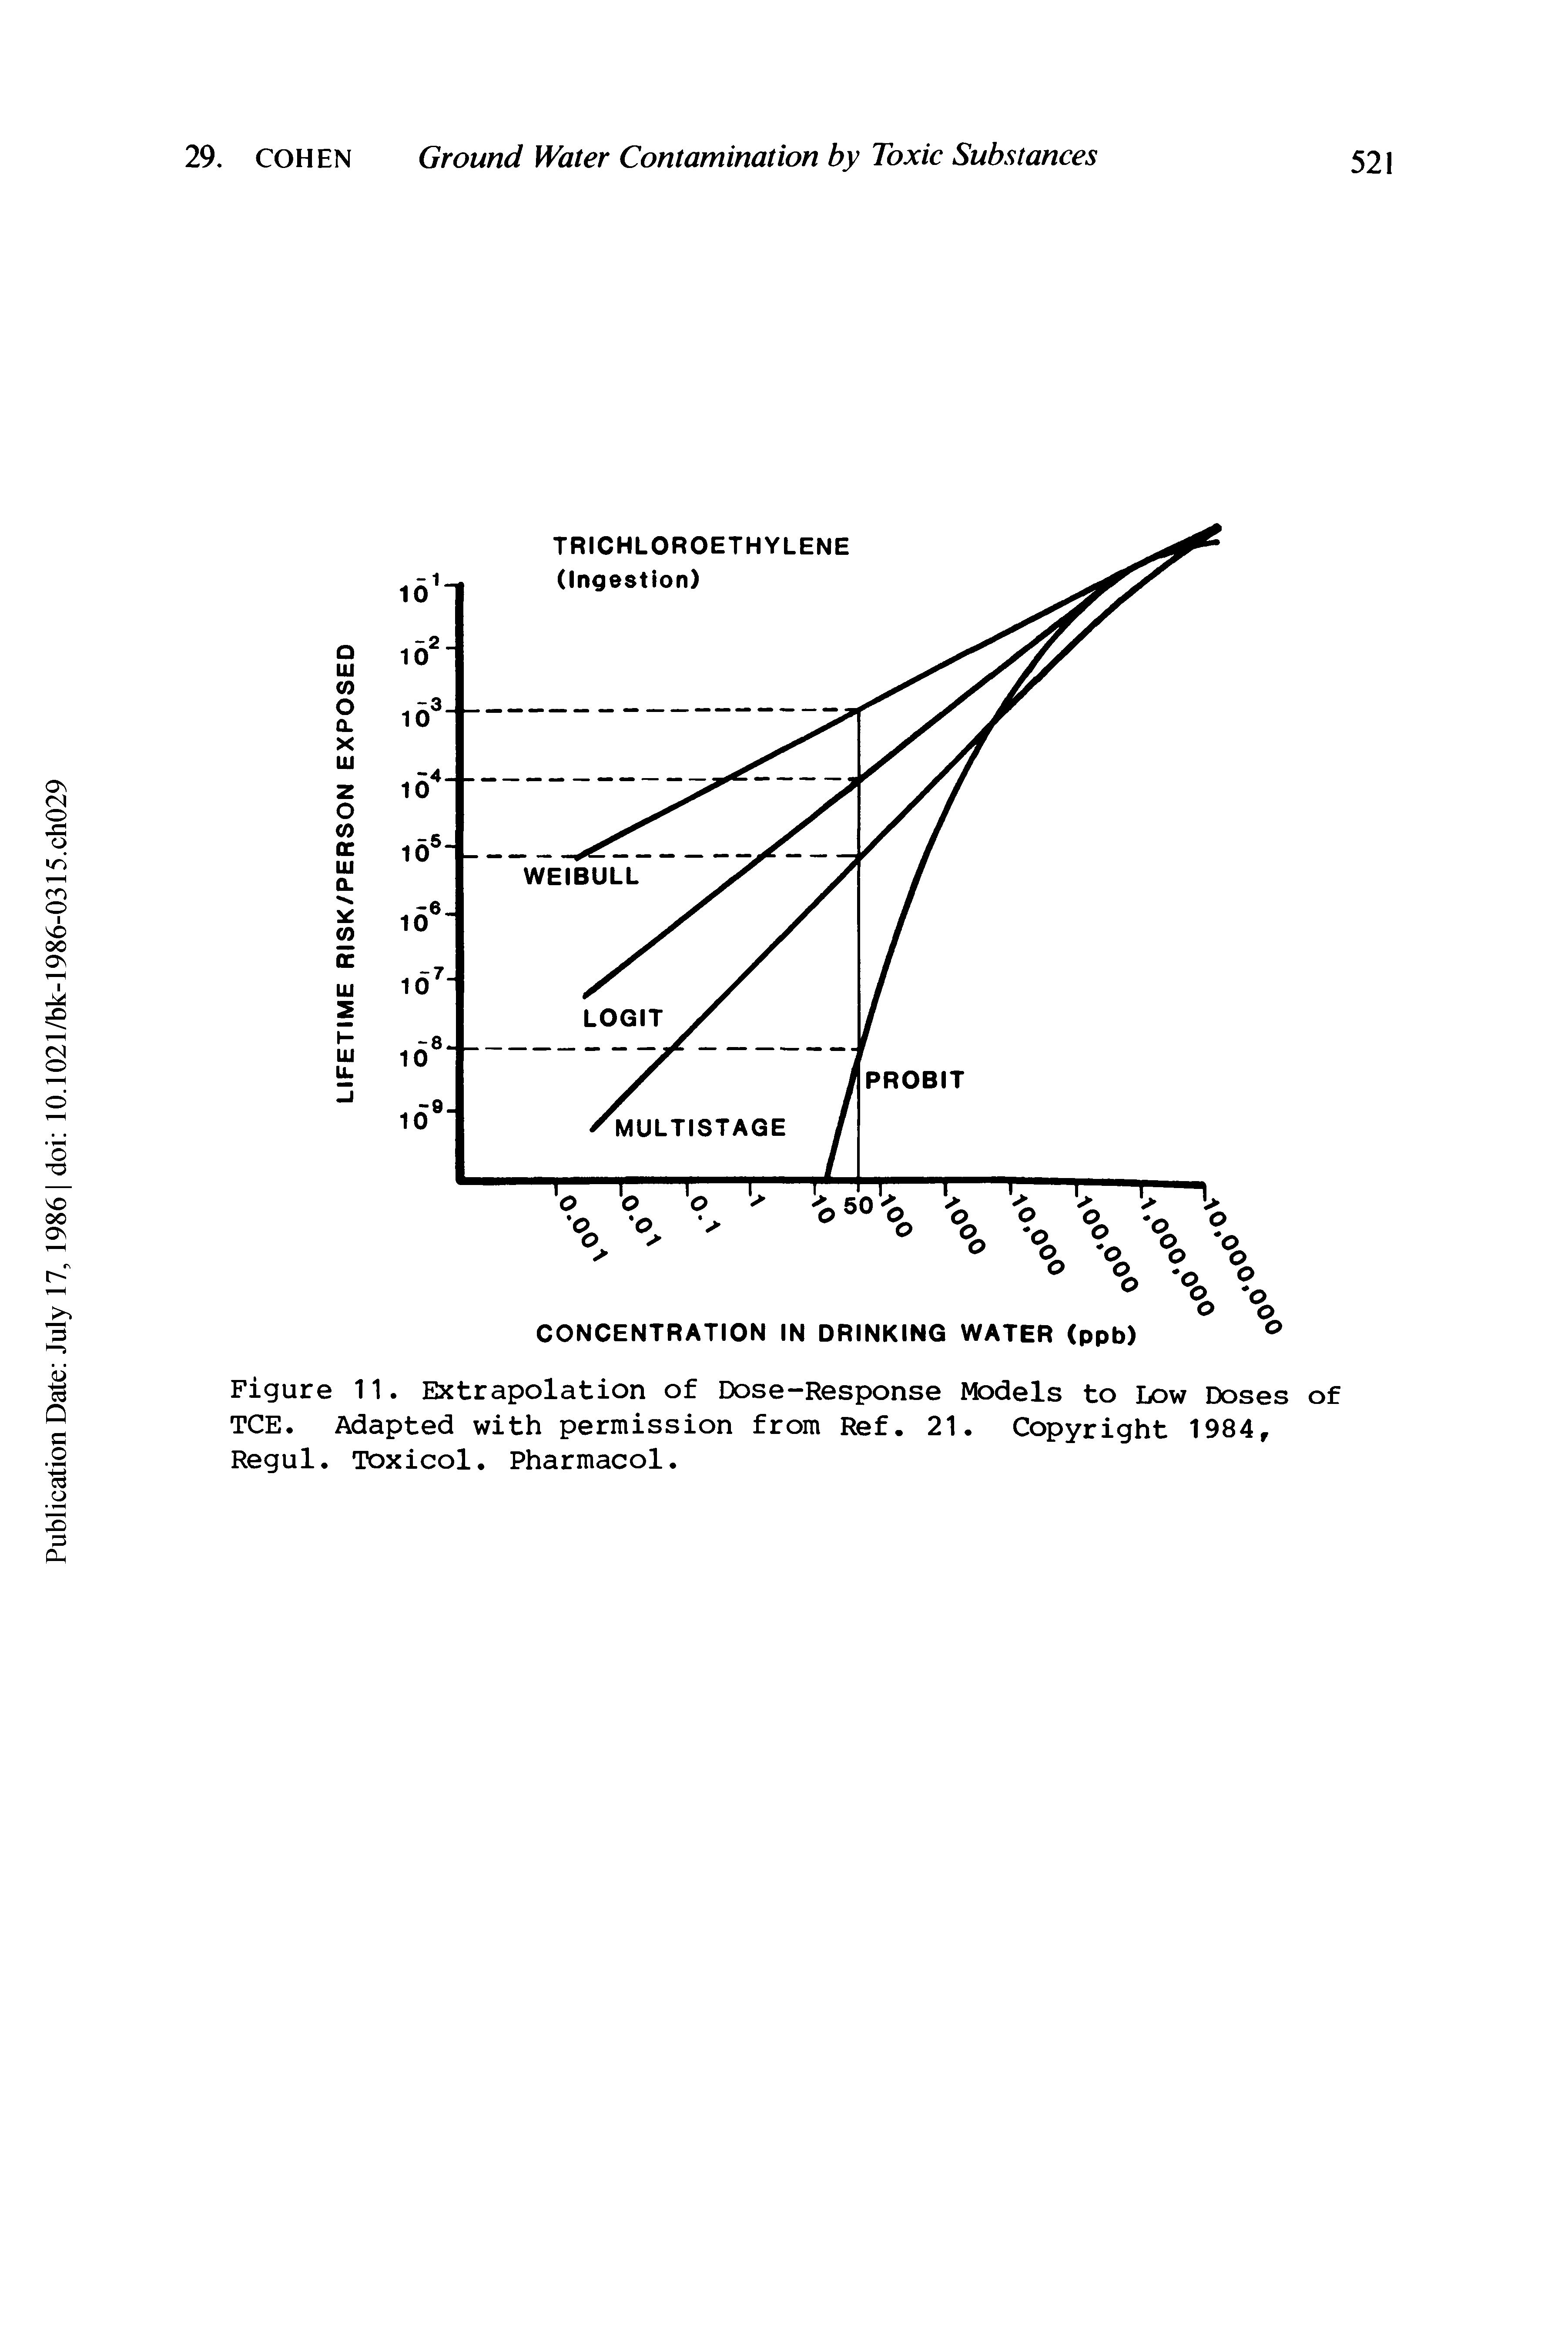 Figure 11. Extrapolation of Dose-Response Models to Low Doses of TCE. Adapted with permission from Ref. 21. Copyright 1984, Regul. Toxicol. Pharmacol.